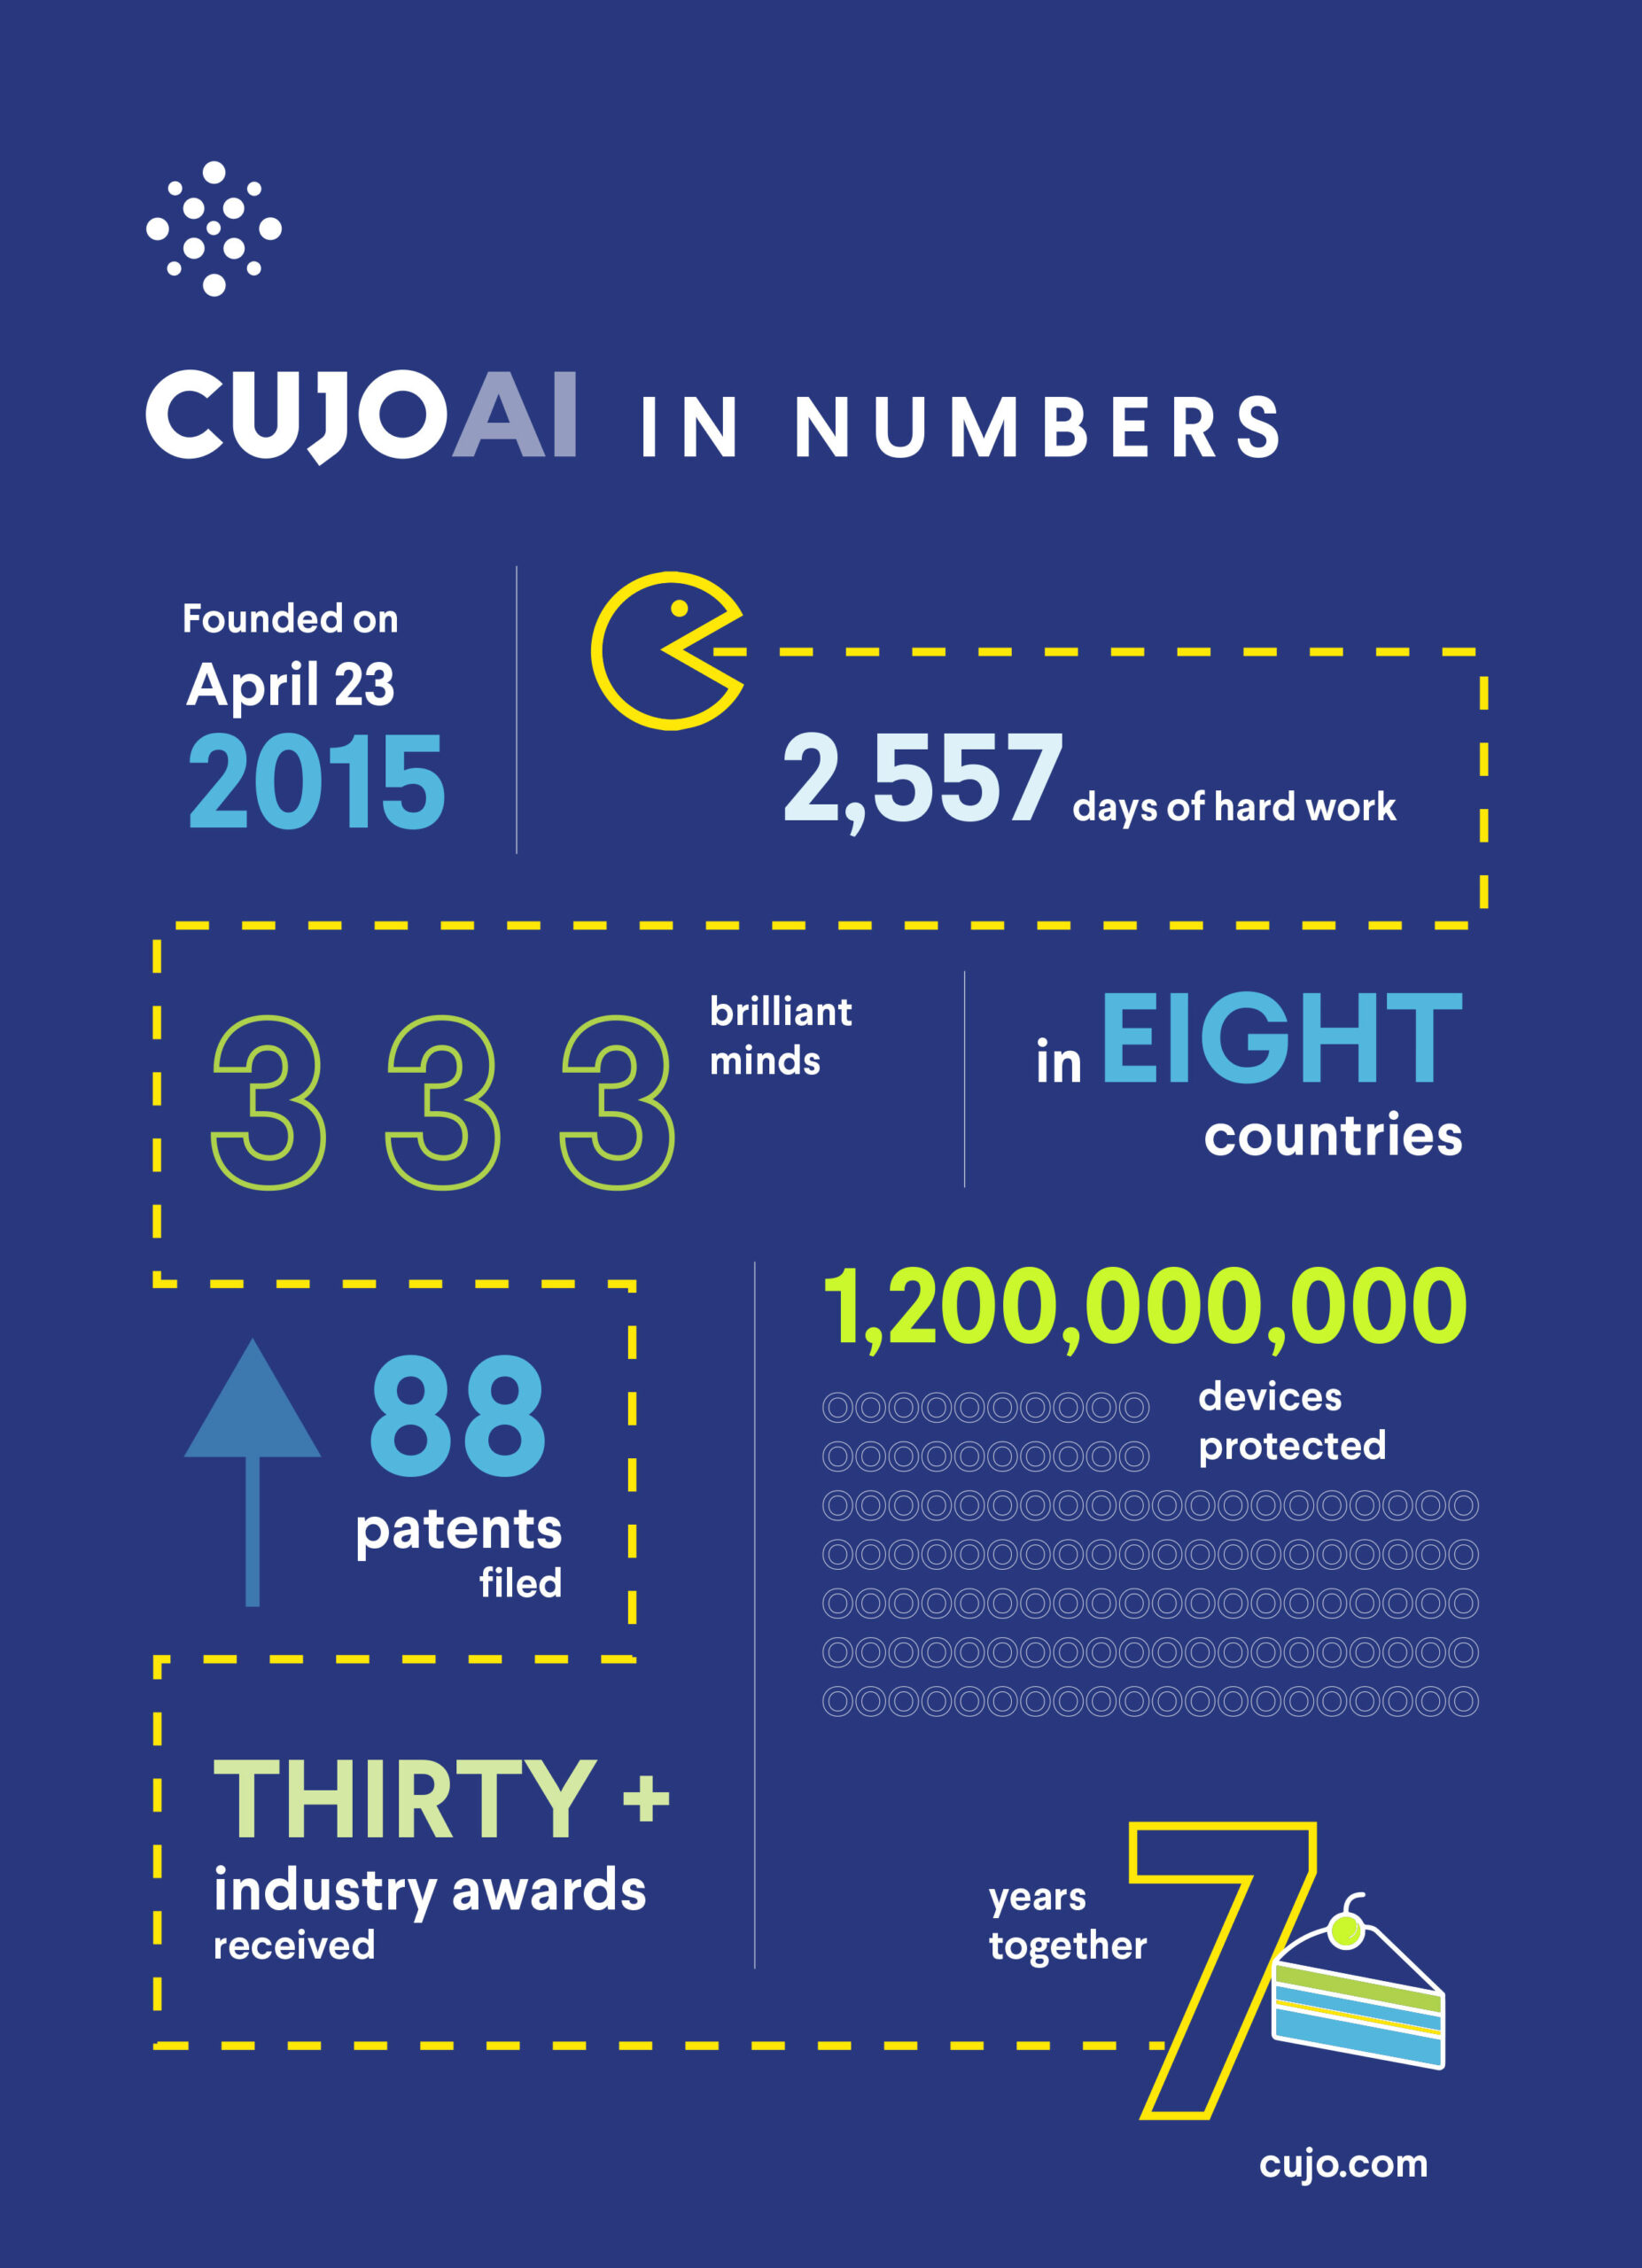 CUJO AI was founded on April 23, 2015. In 2557 days 333 brilliant minds have worked on our products in 8 countries and our products are now protecting over 1.2 billion devices. In seven years, CUJO AI's researchers have filed 88 patents and won over 30 industry awards.